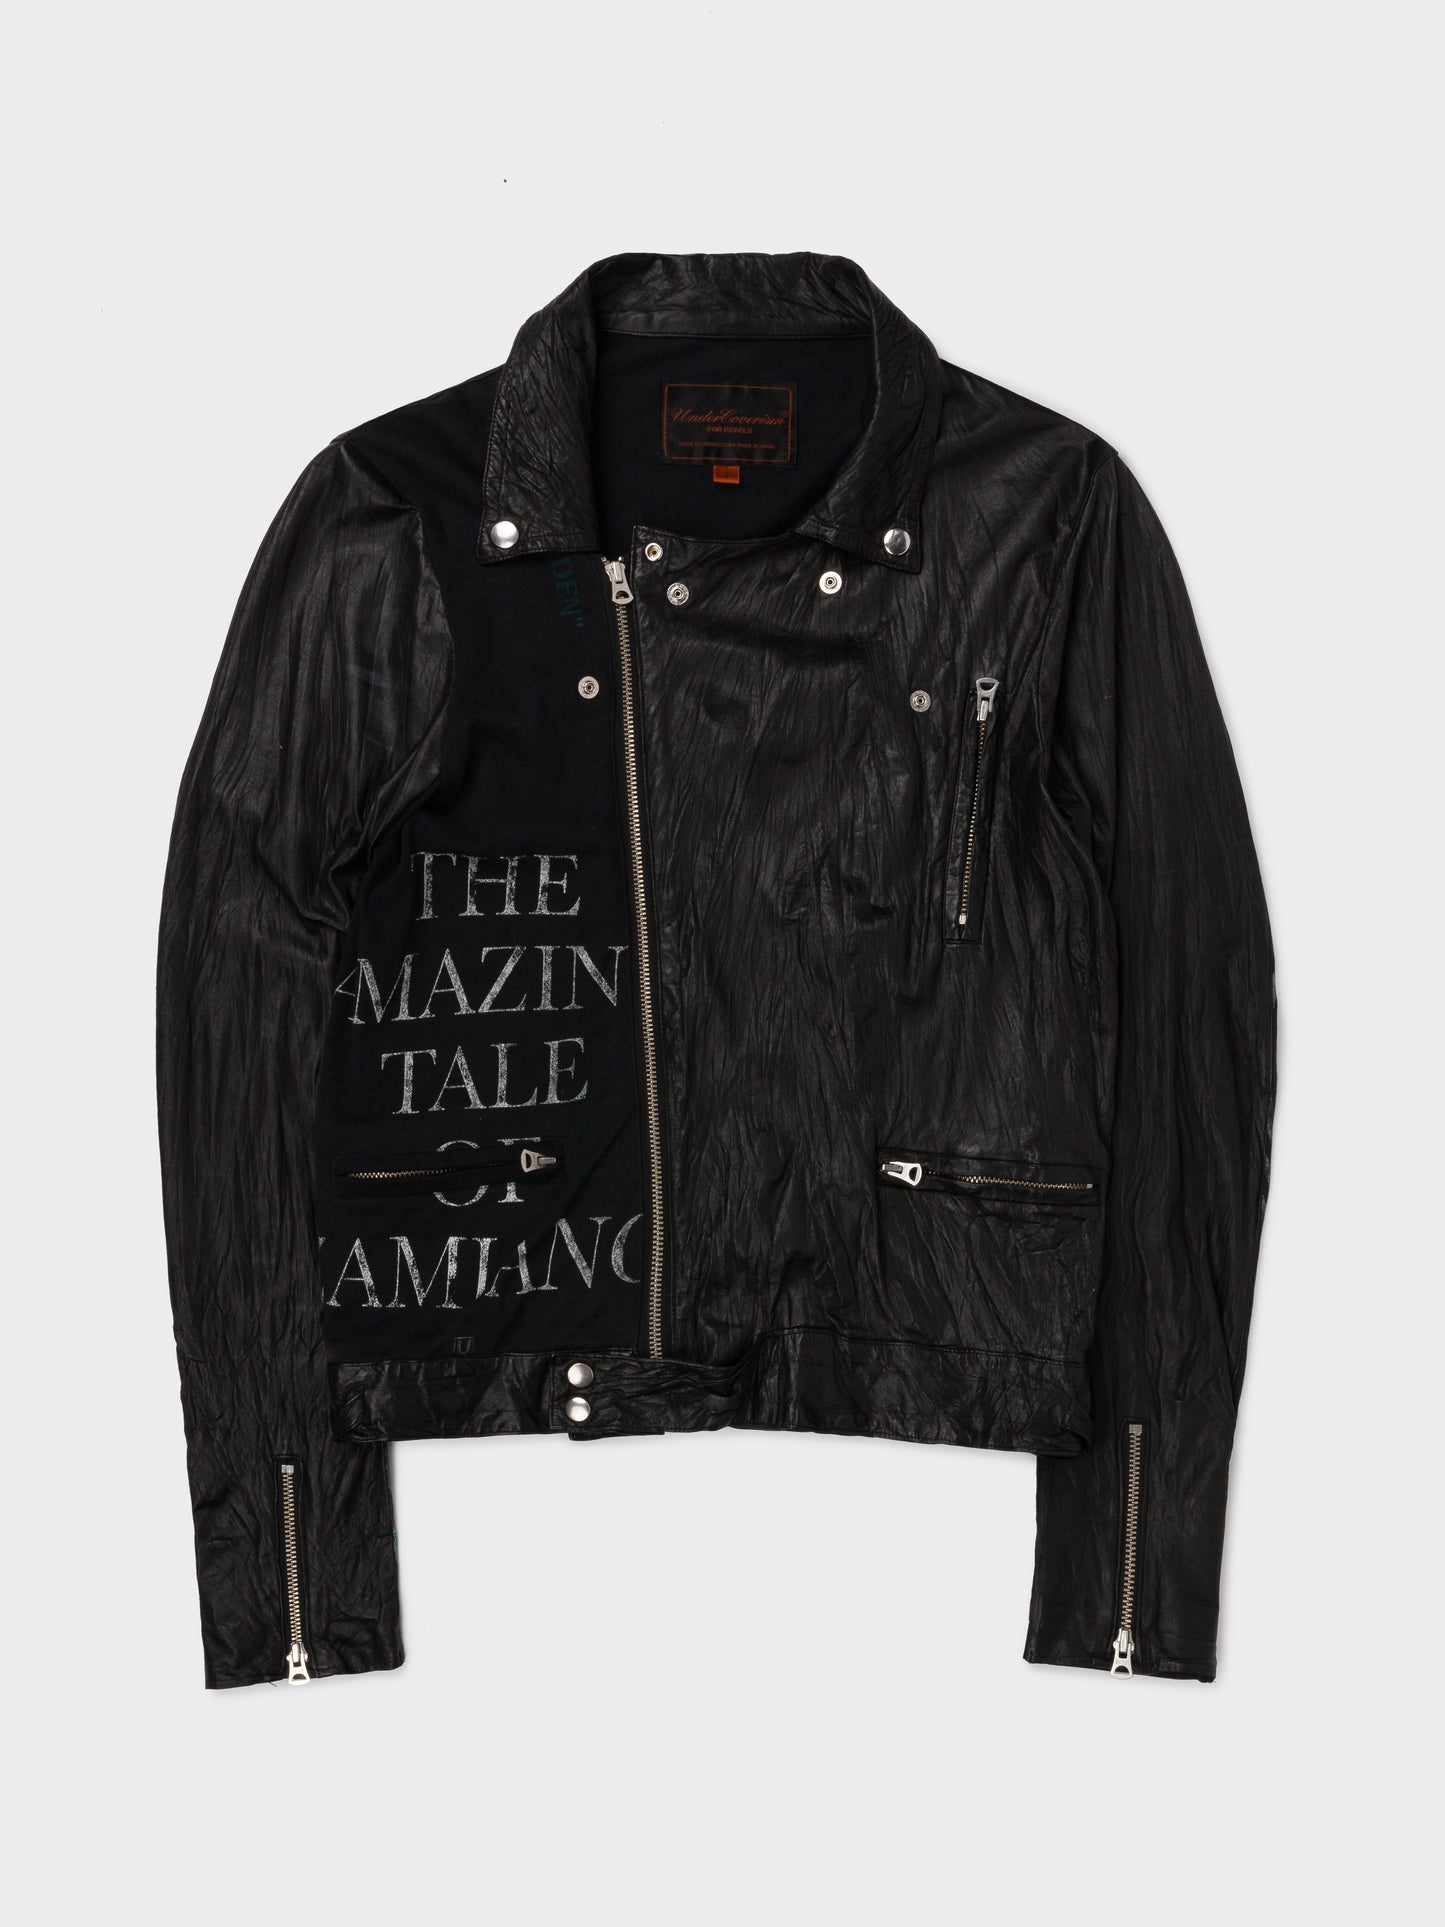 'Zamiang' Klaus Leather Rider Jacket